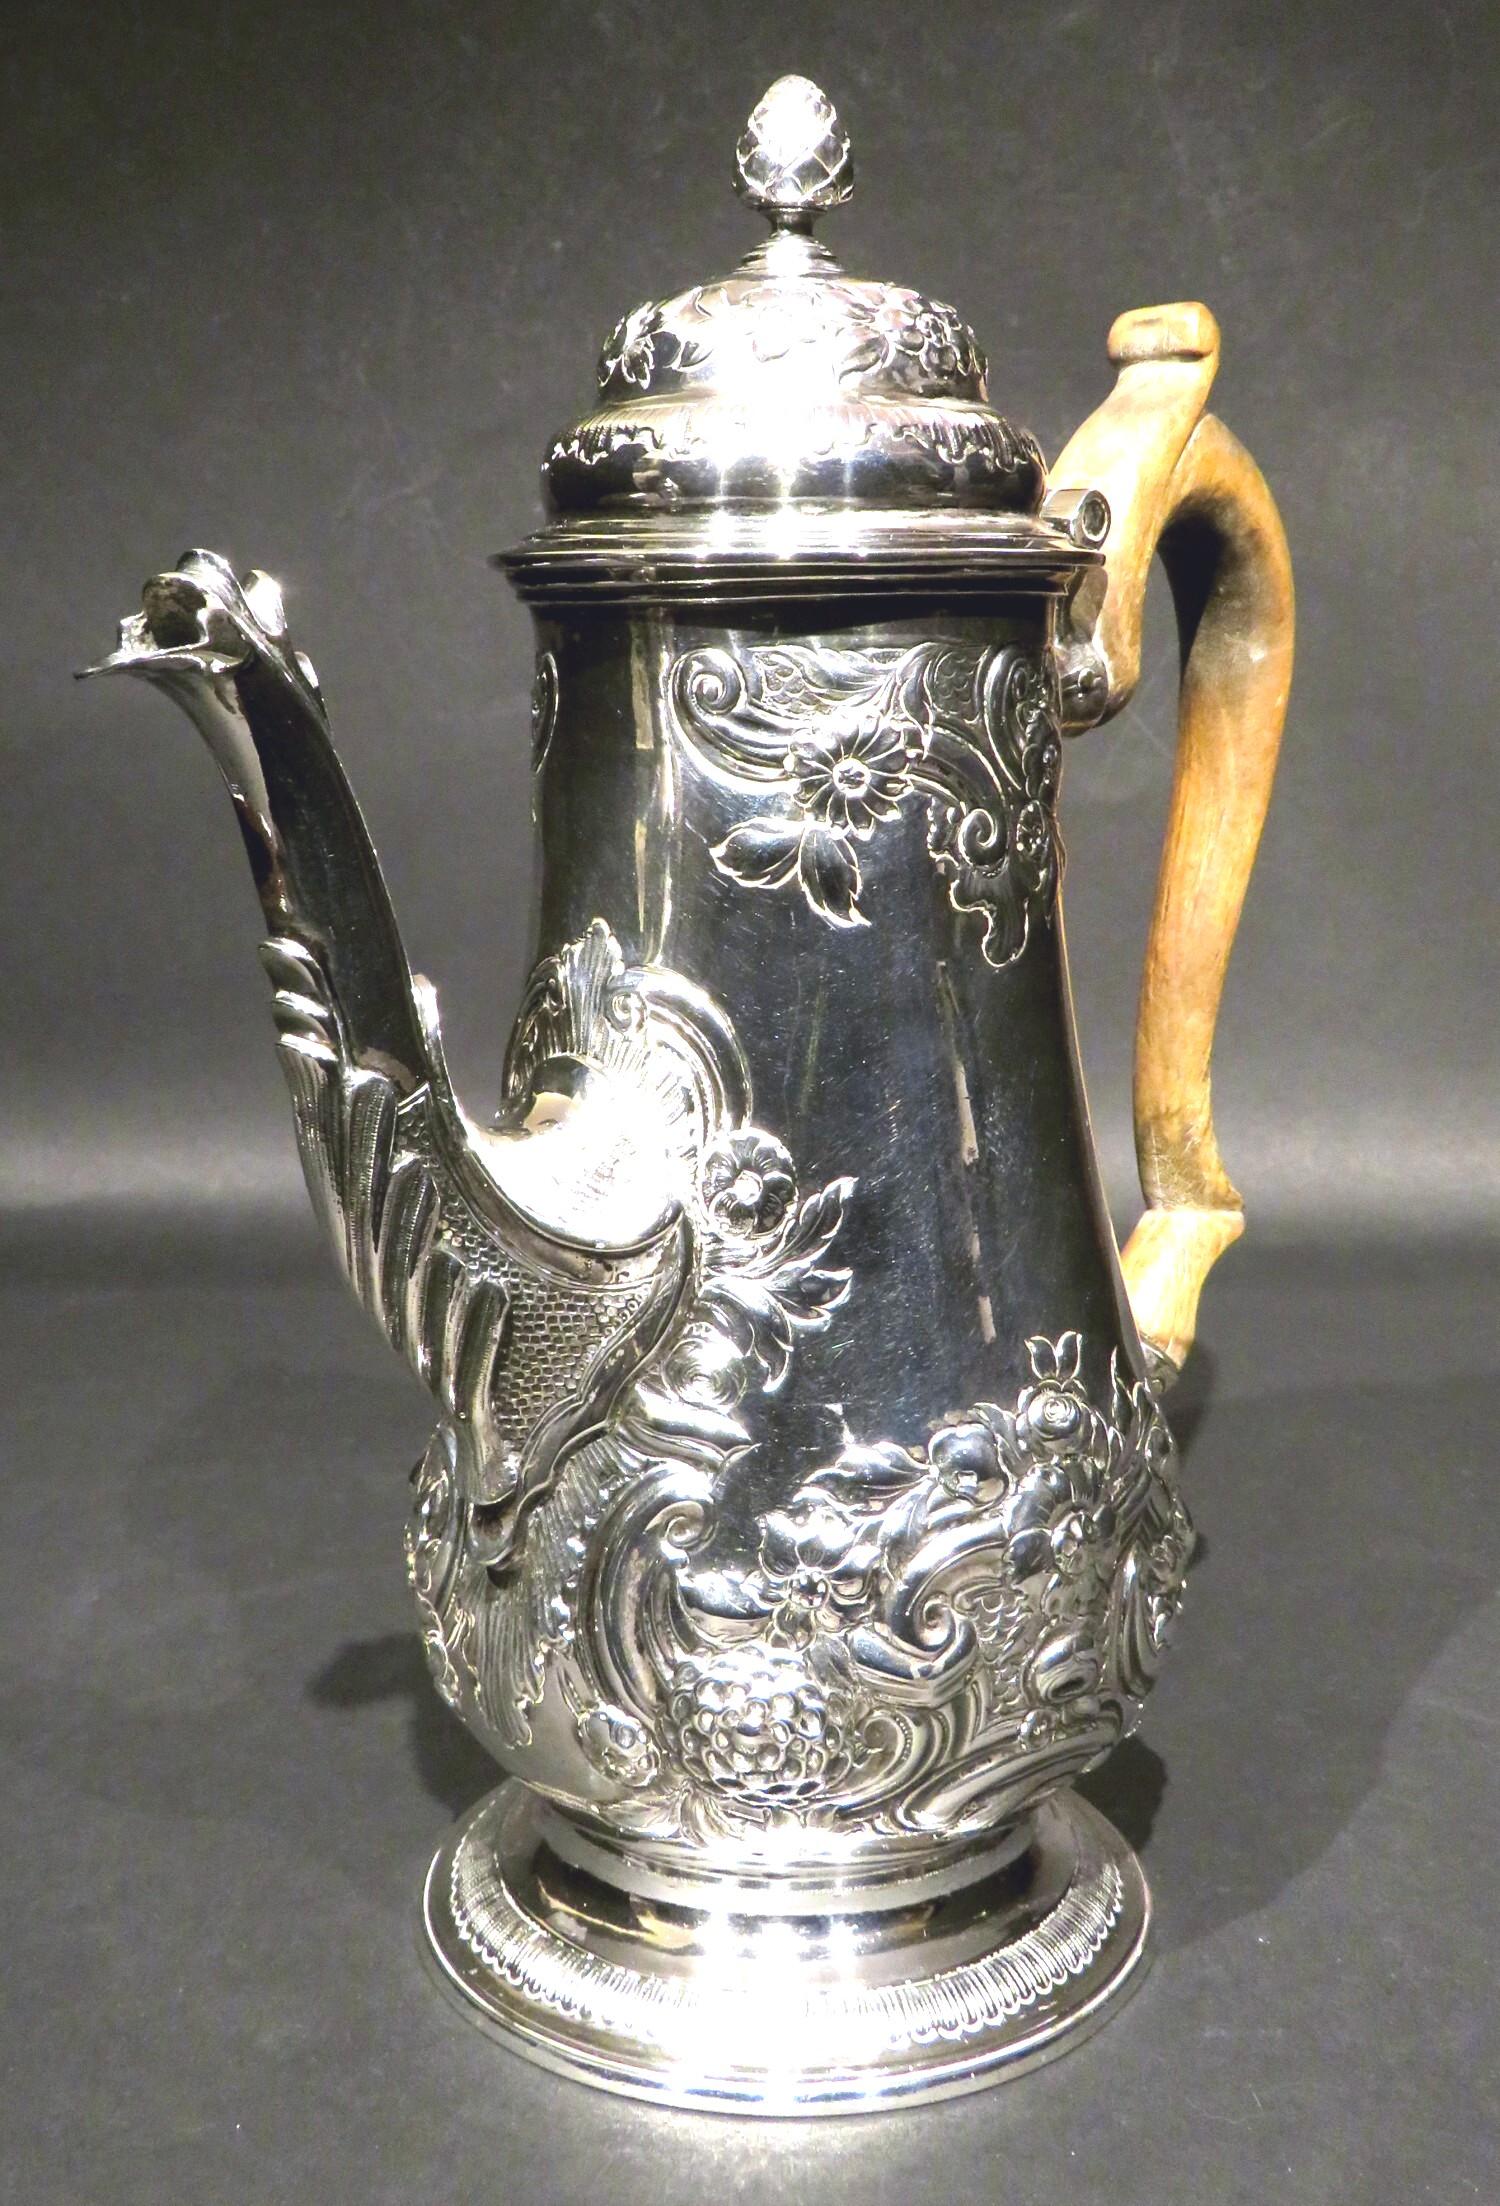 A fine Regency Period / George IV sterling silver coffee pot of baluster form, bearing partially rubbed London hallmarks with date letter for 1819 and makers marks for William Bateman 1st above a heraldic crest. 
Richly embossed overall with